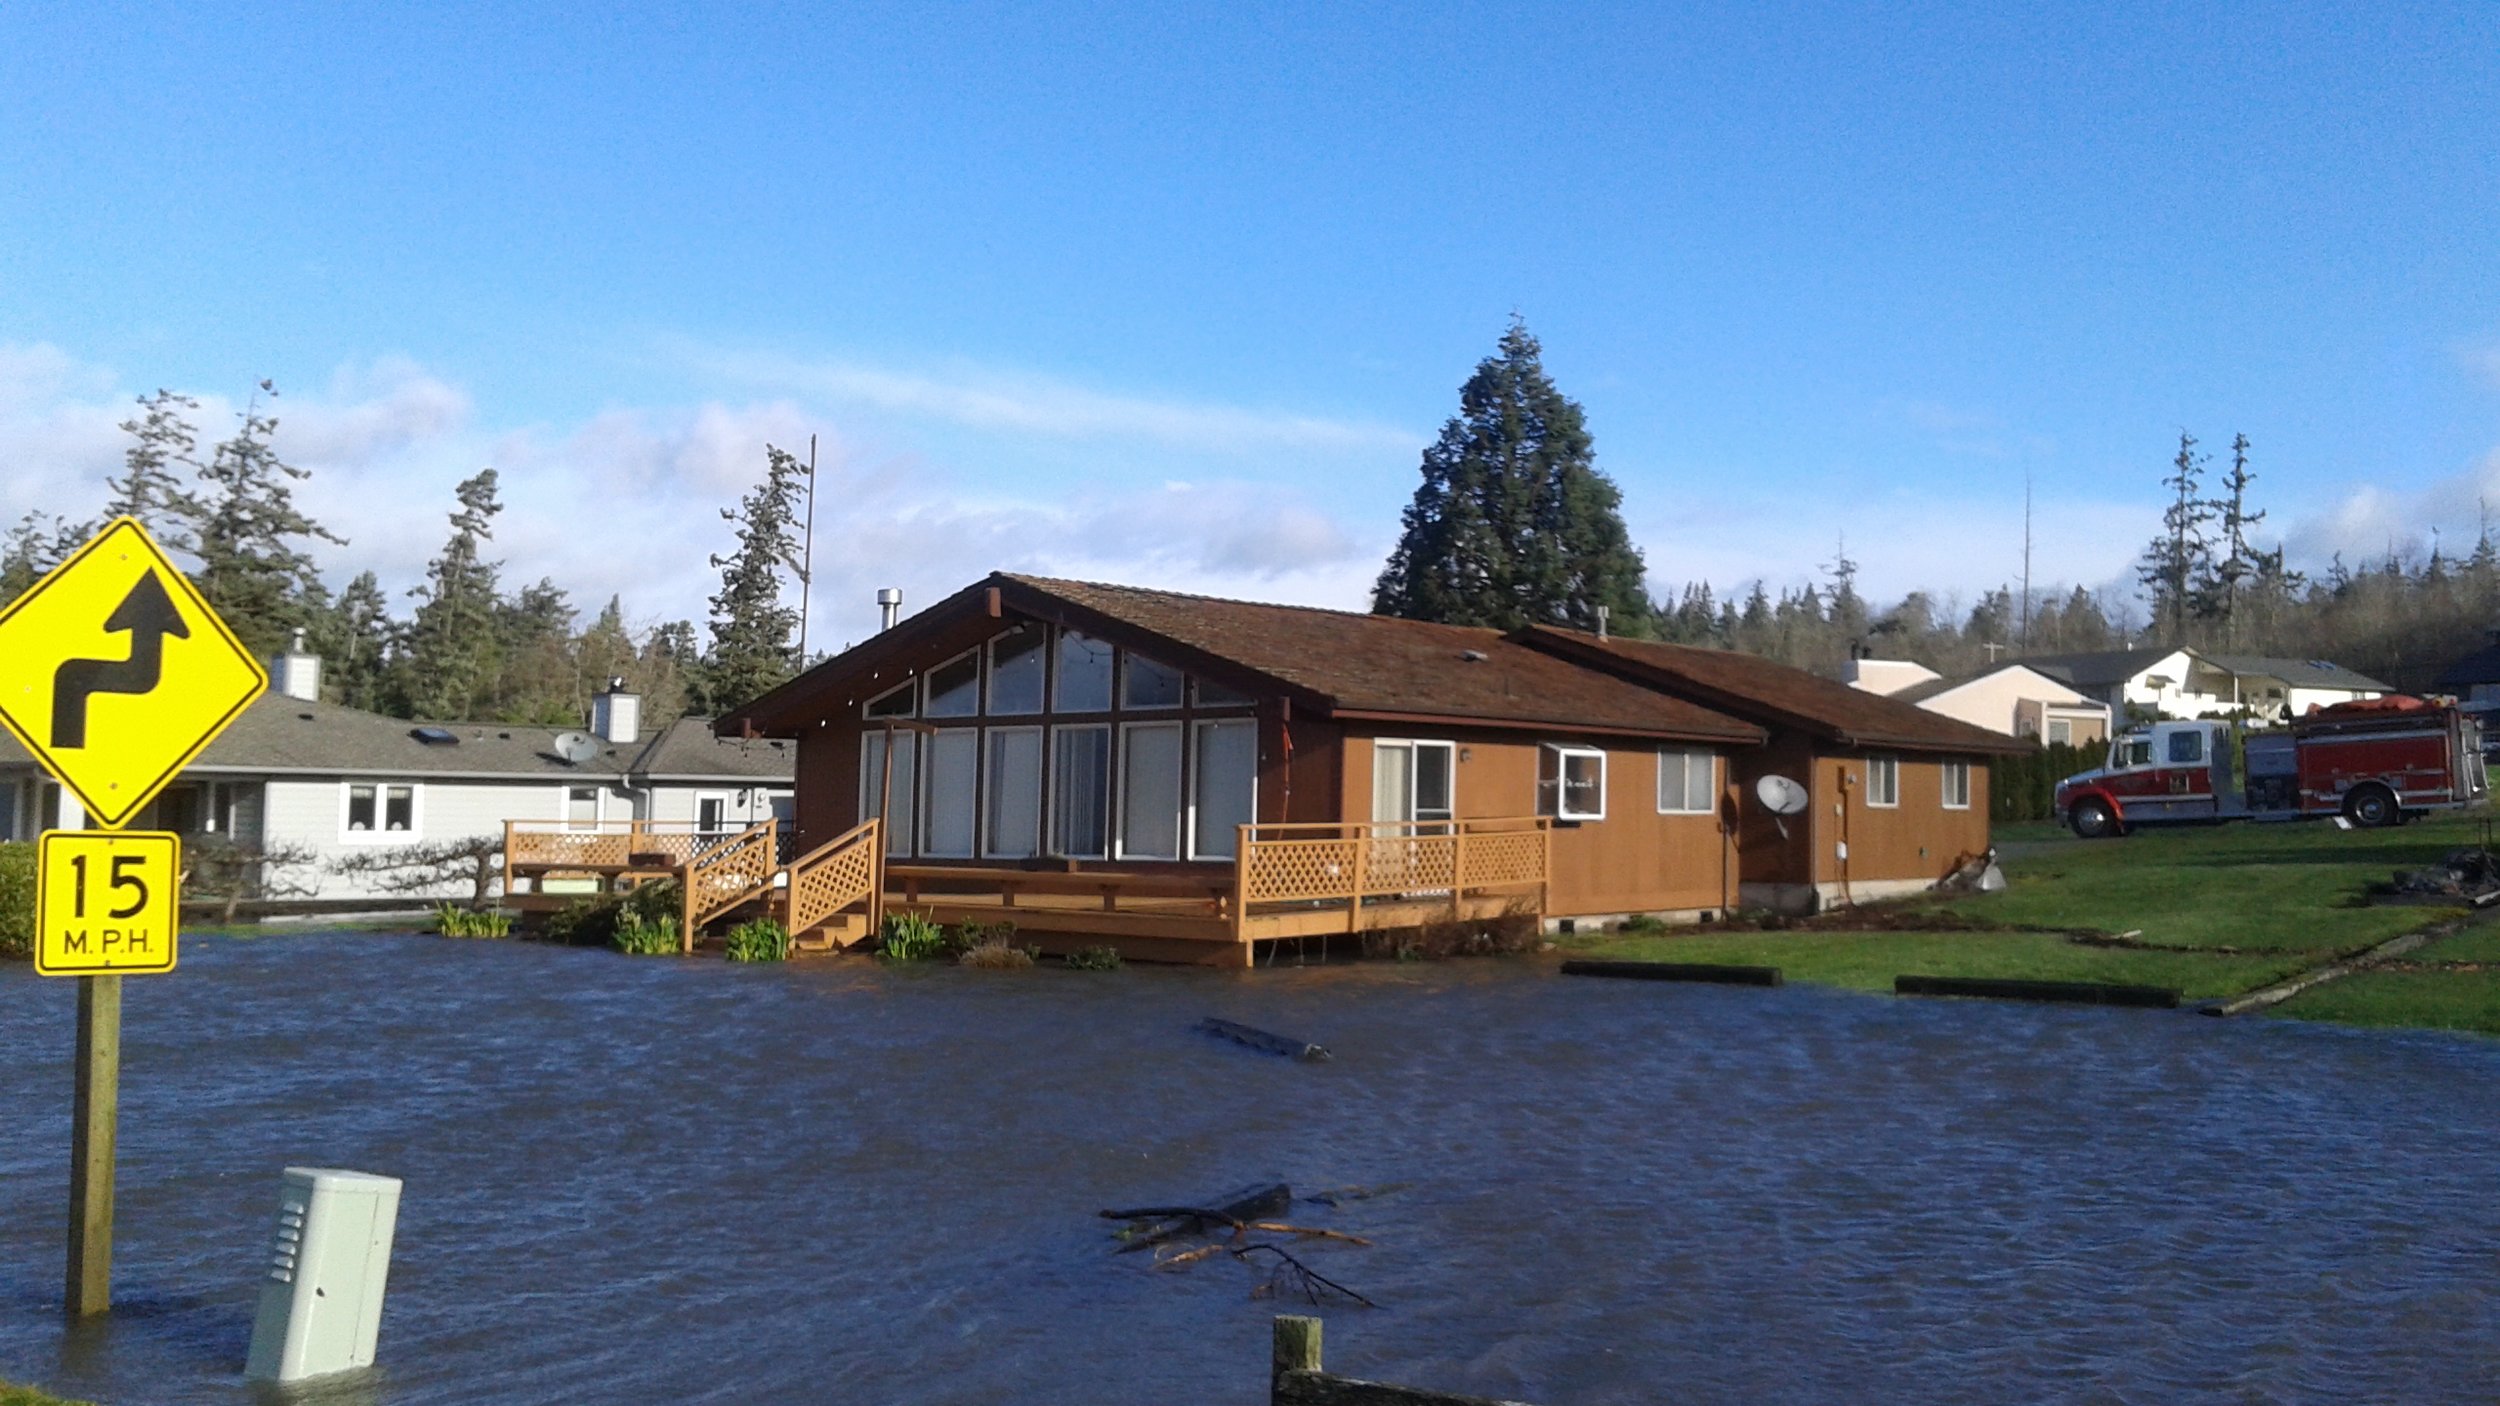  Climate change, through larger storm surges and flooding into higher areas, is already affecting the Swinomish Tribe. 